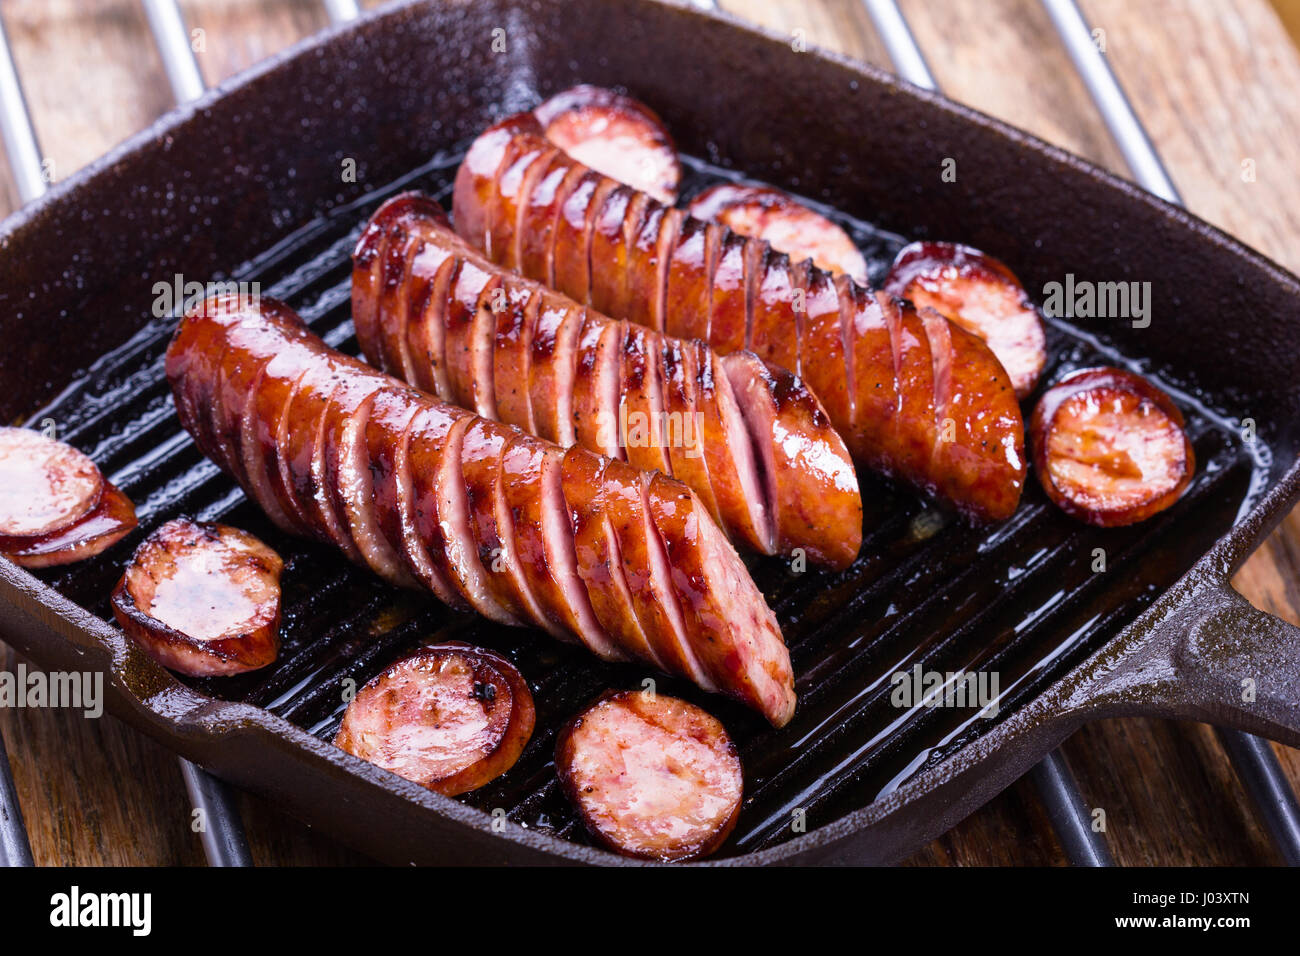 Polish traditional sausages fried on a cast iron skillet. Stock Photo